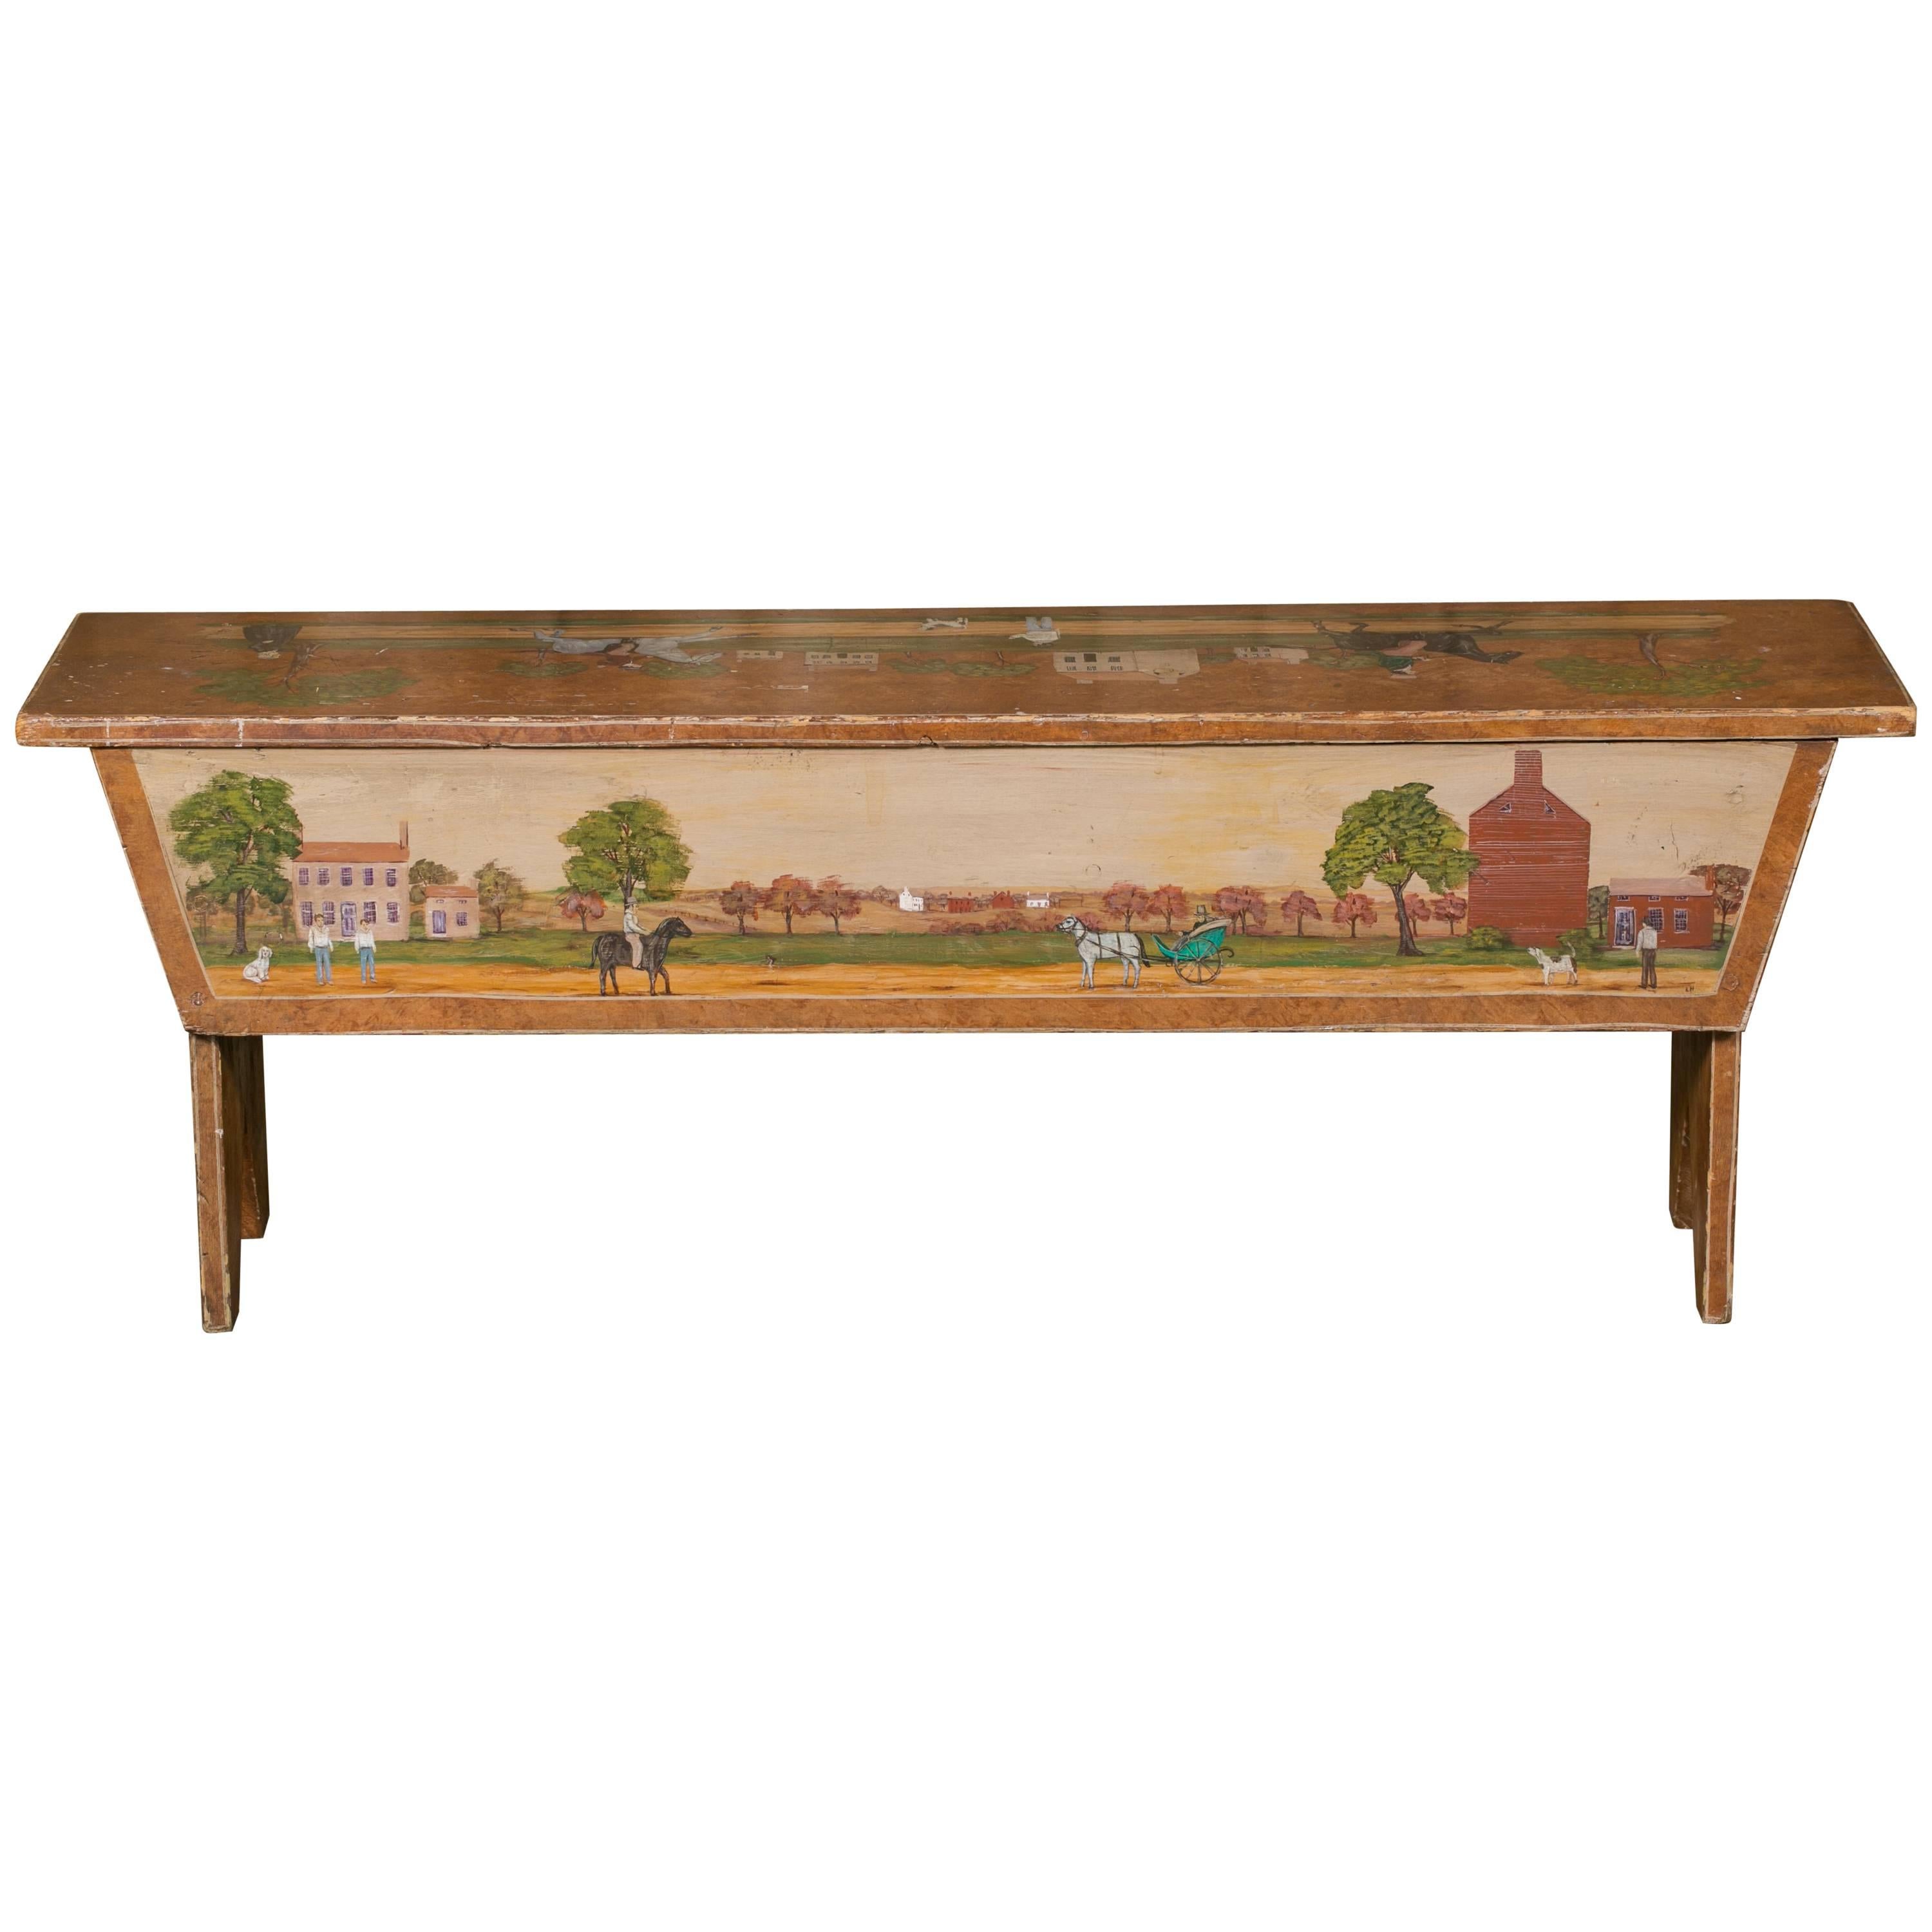 Antique Wooden Bench Hand-Painted by Artist Lew Hudnall, circa 1890